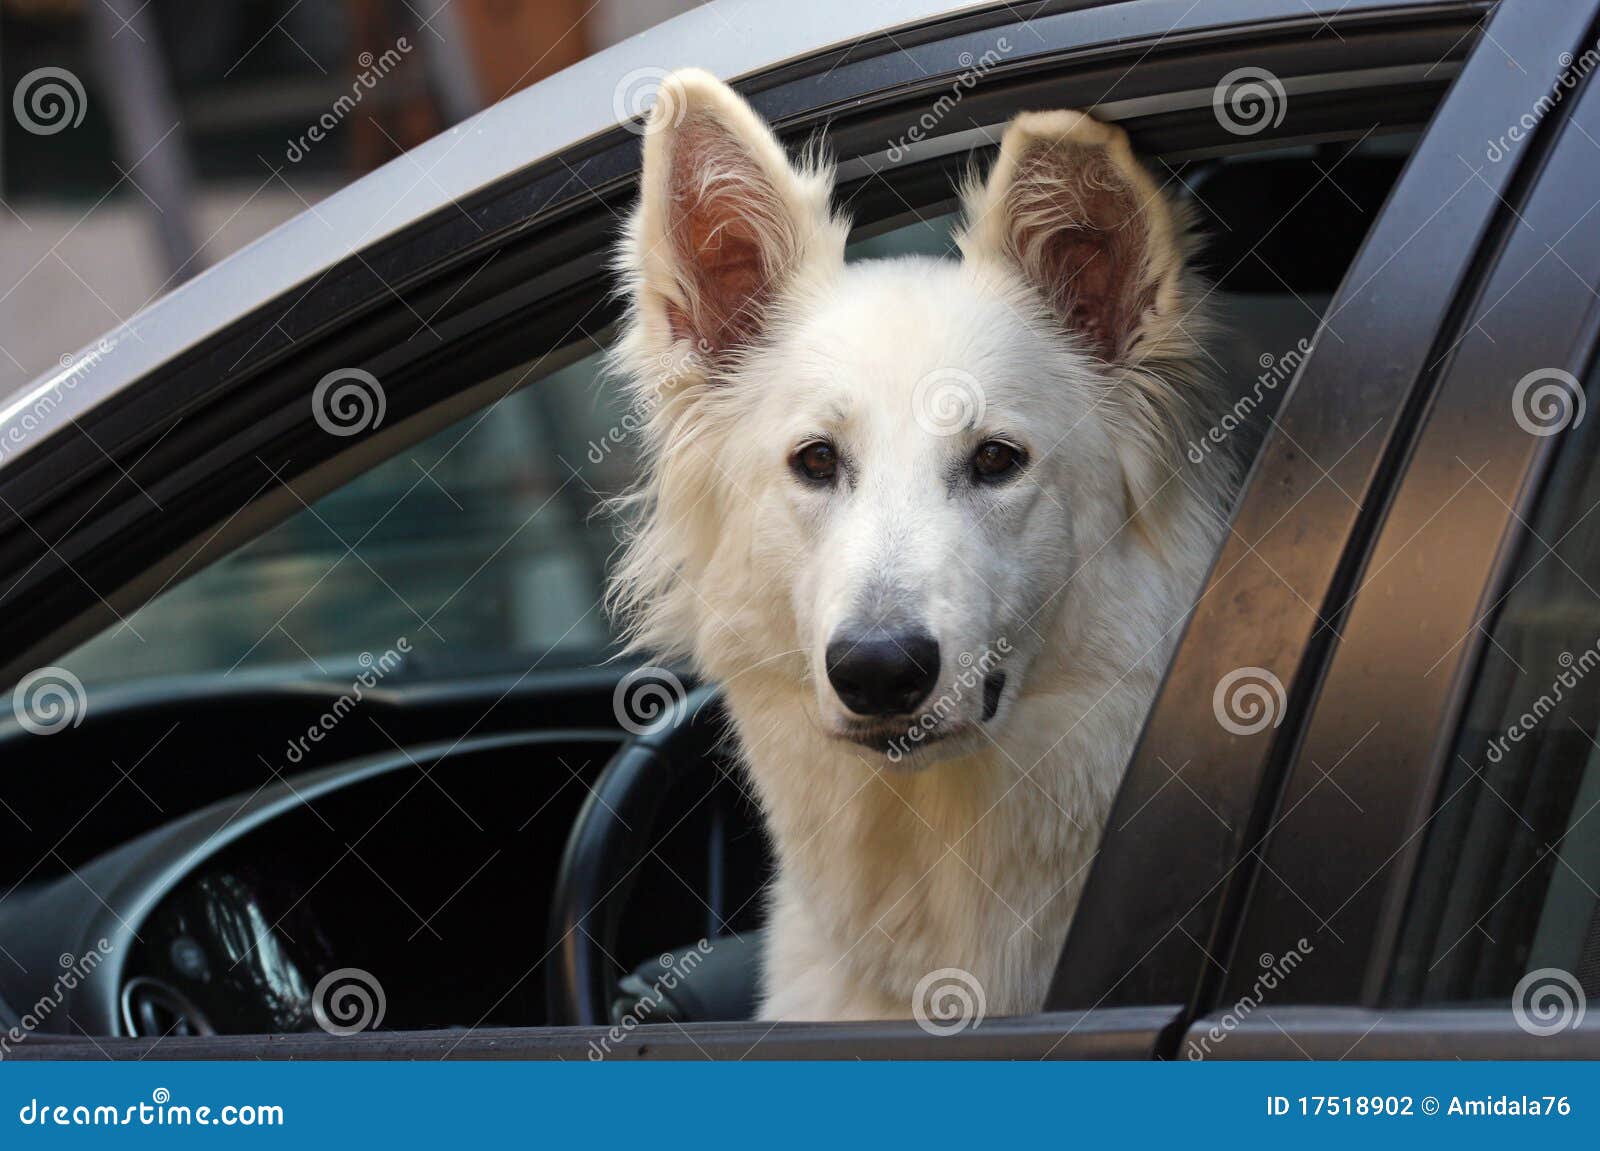 White dog in the car stock photo. Image of watch, breed - 17518902